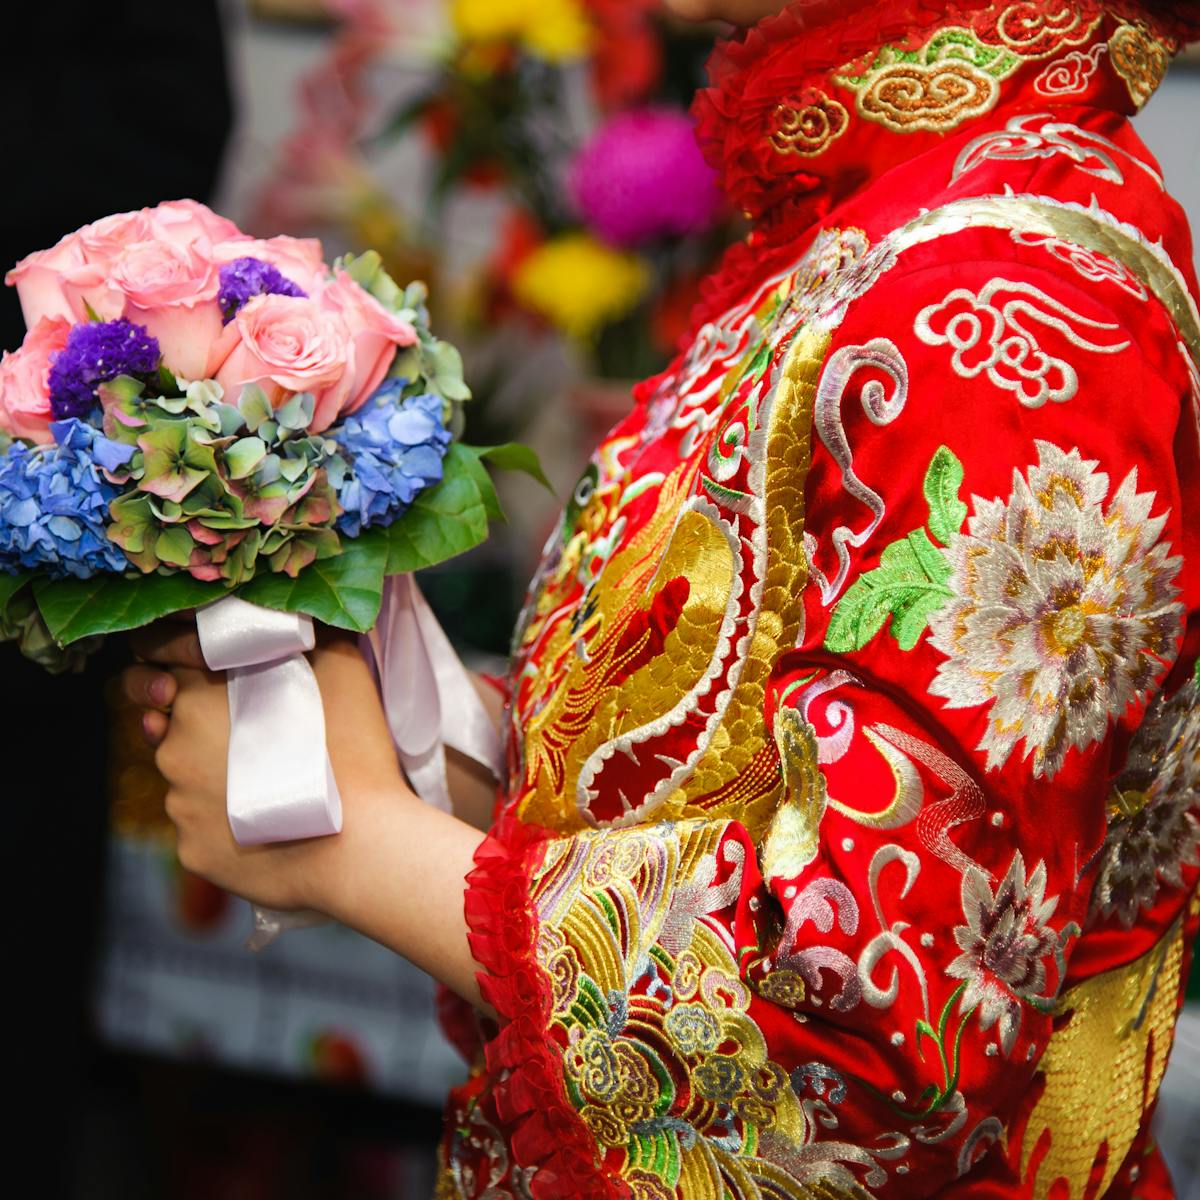 Chinese Brides Wear As Many As Five Dresses Yet Provide